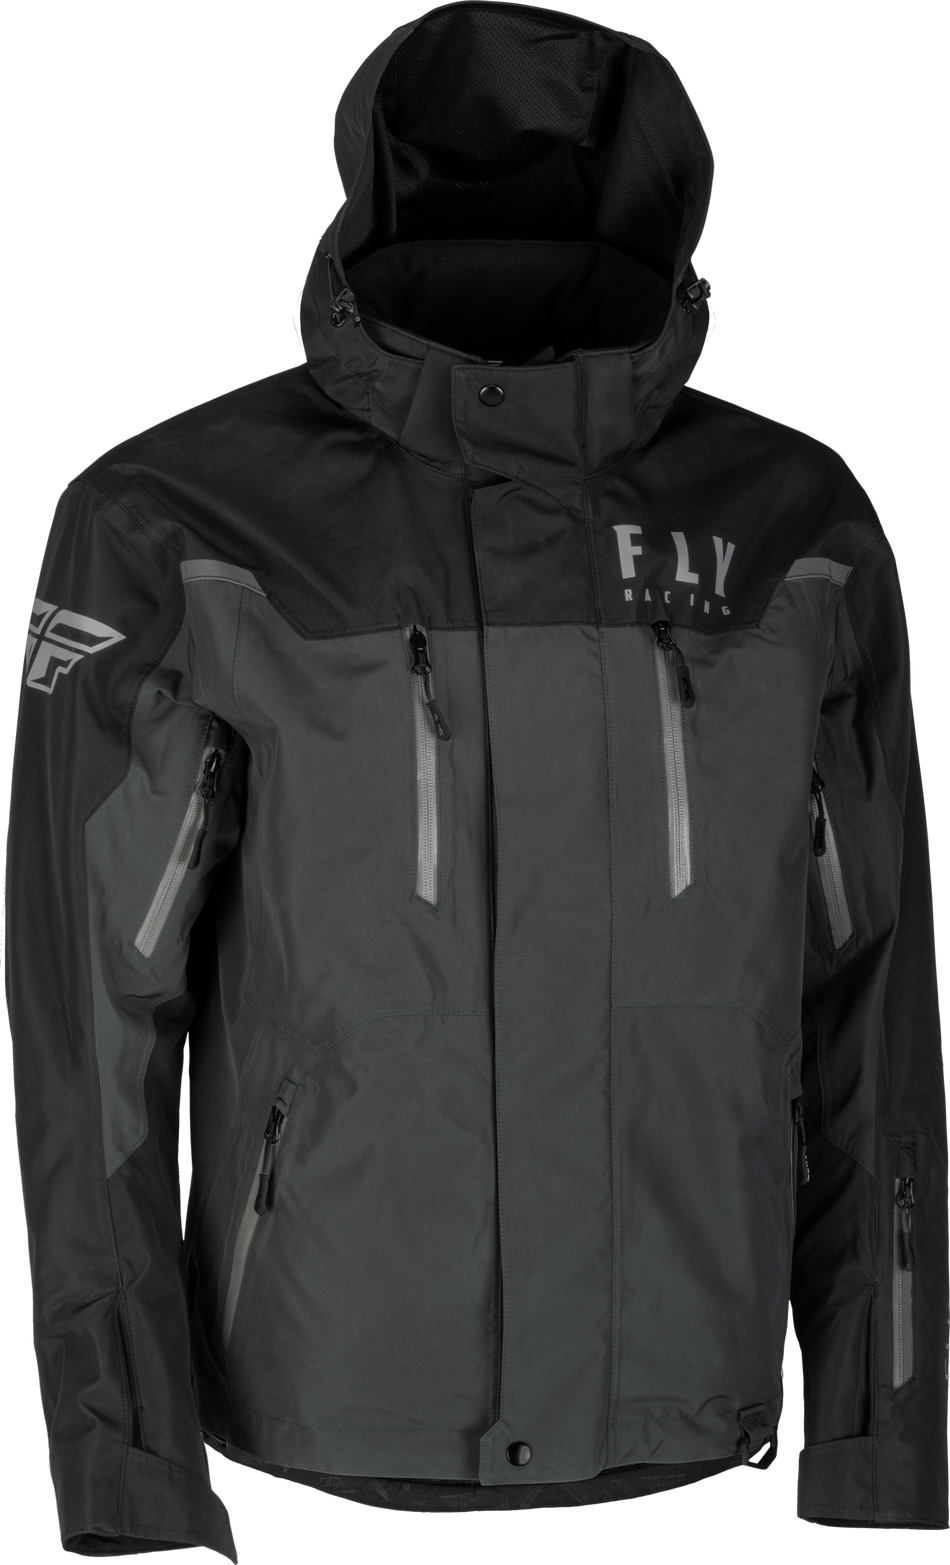 FLY RACING Incline Jacket Black/Charcoal Xl 470-4103X